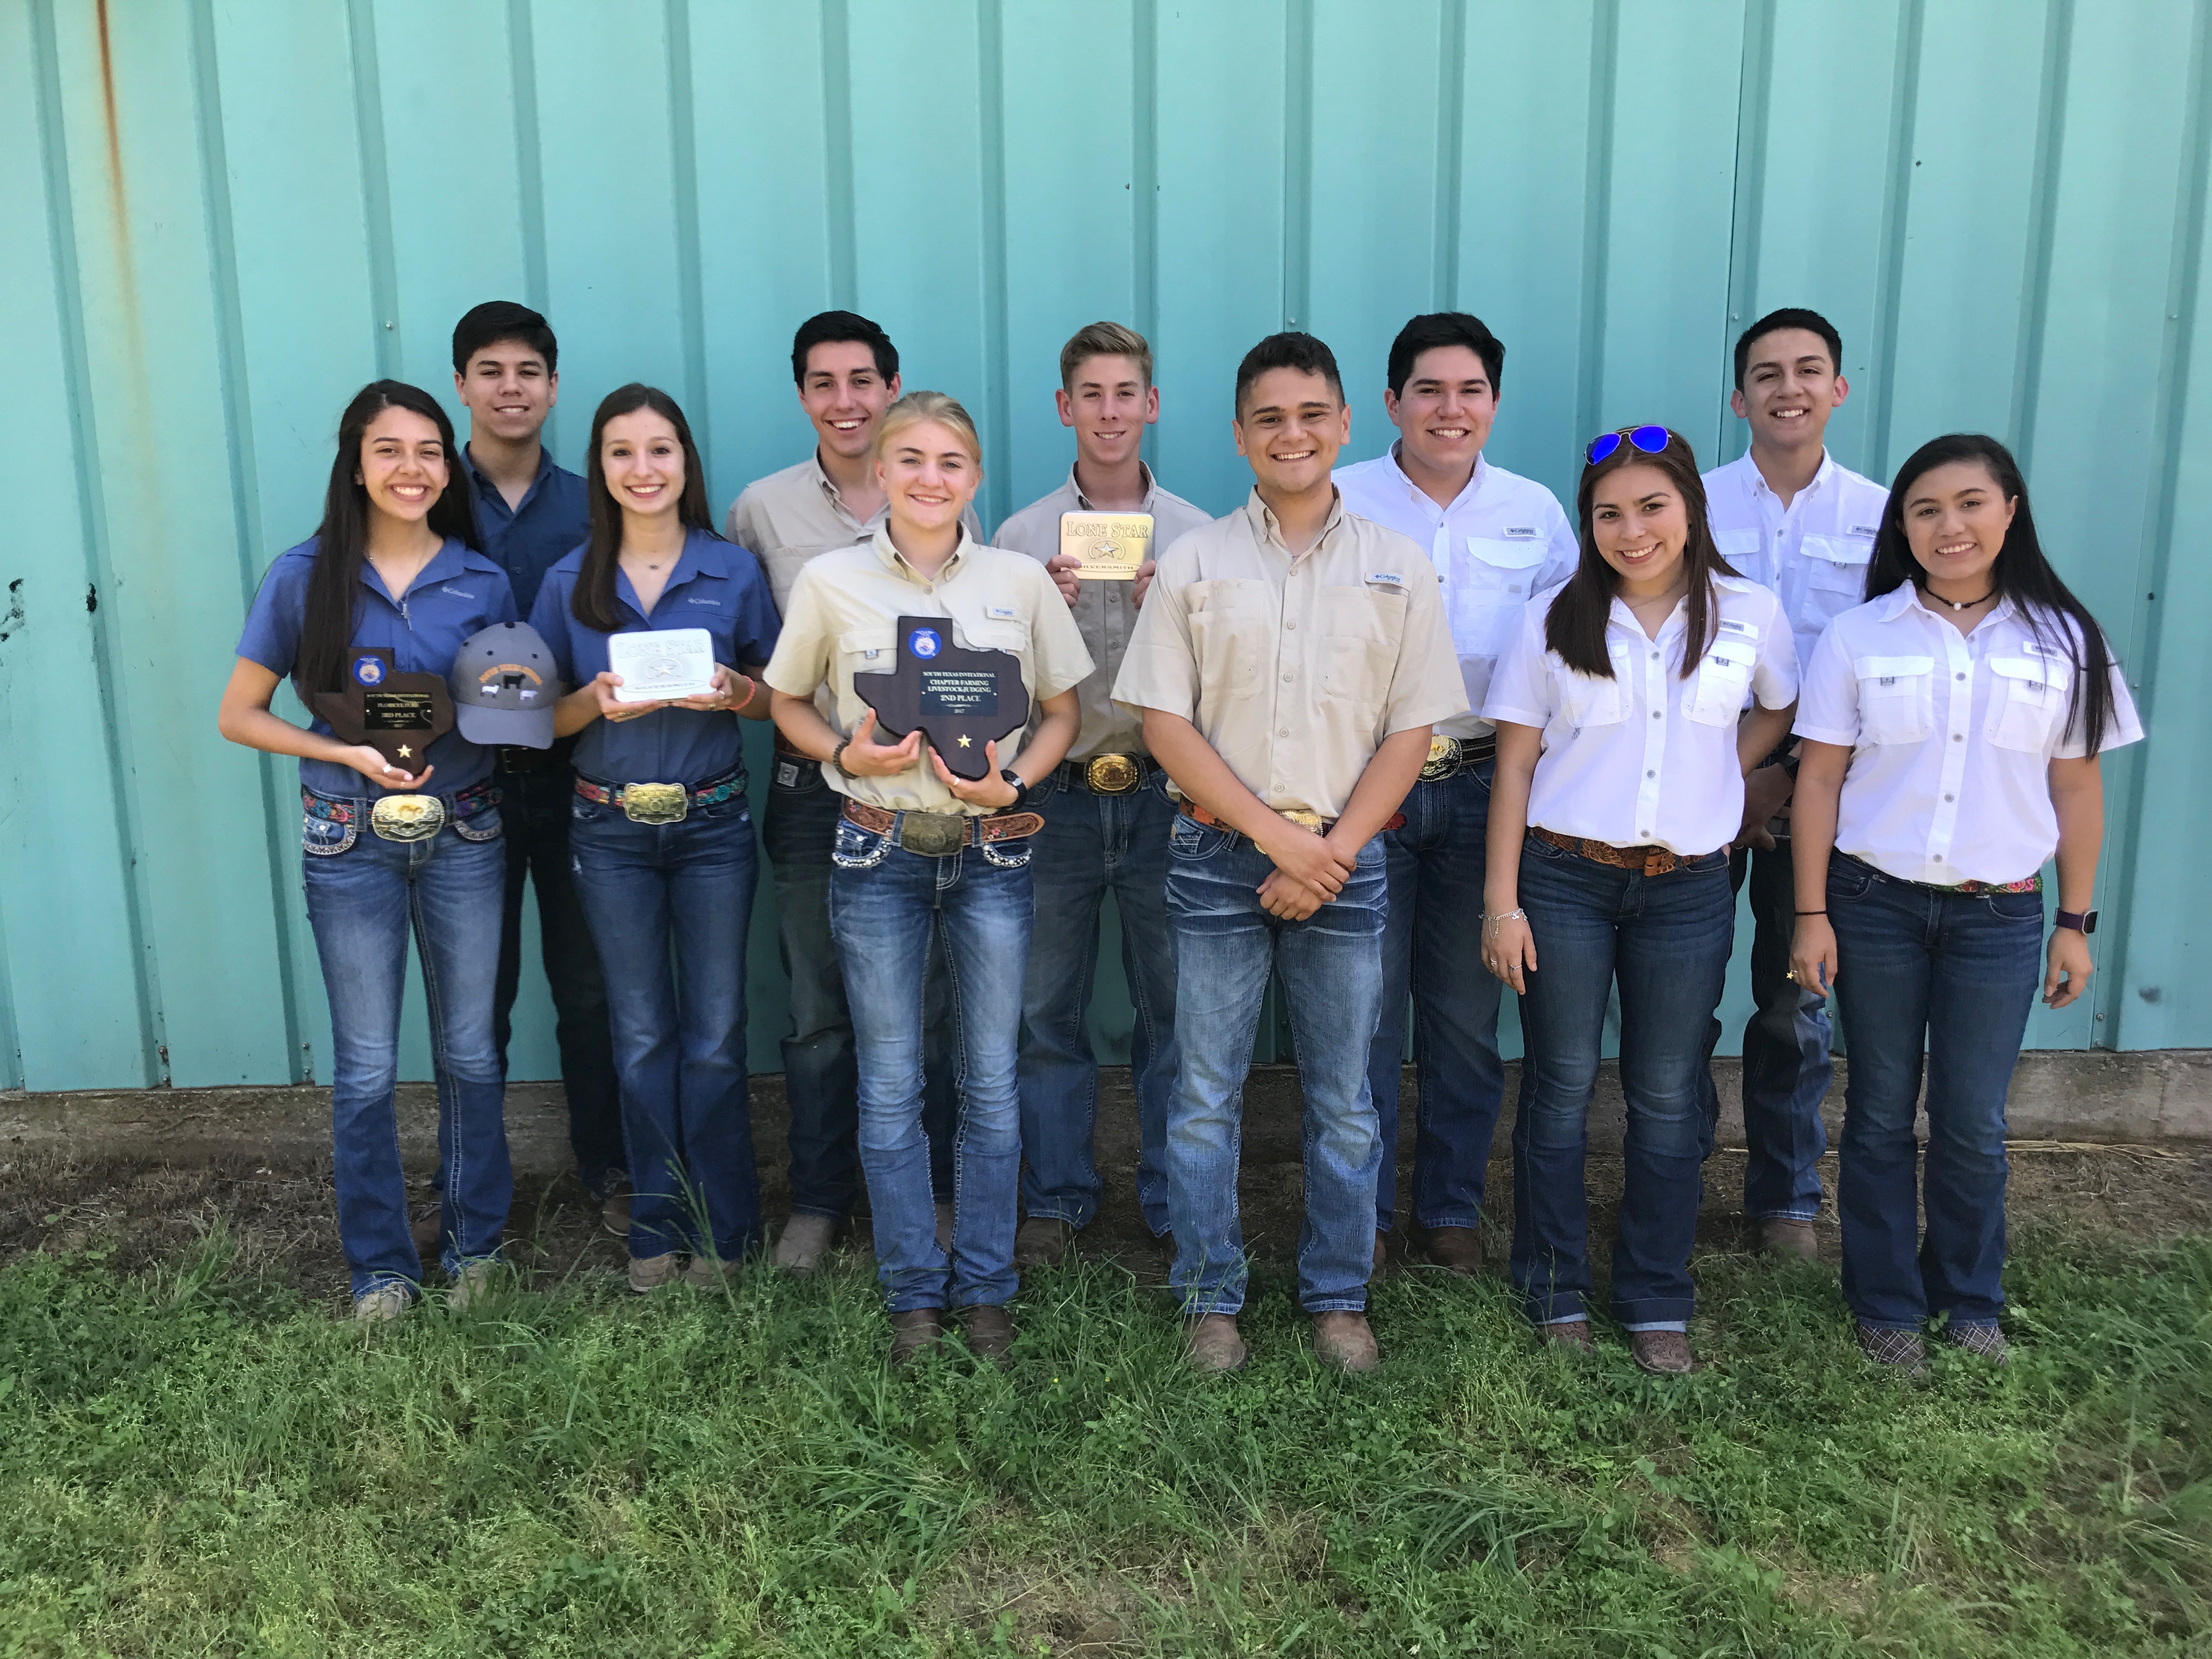 South FFA Career Development Event teams take top spots in South Texas Invitational